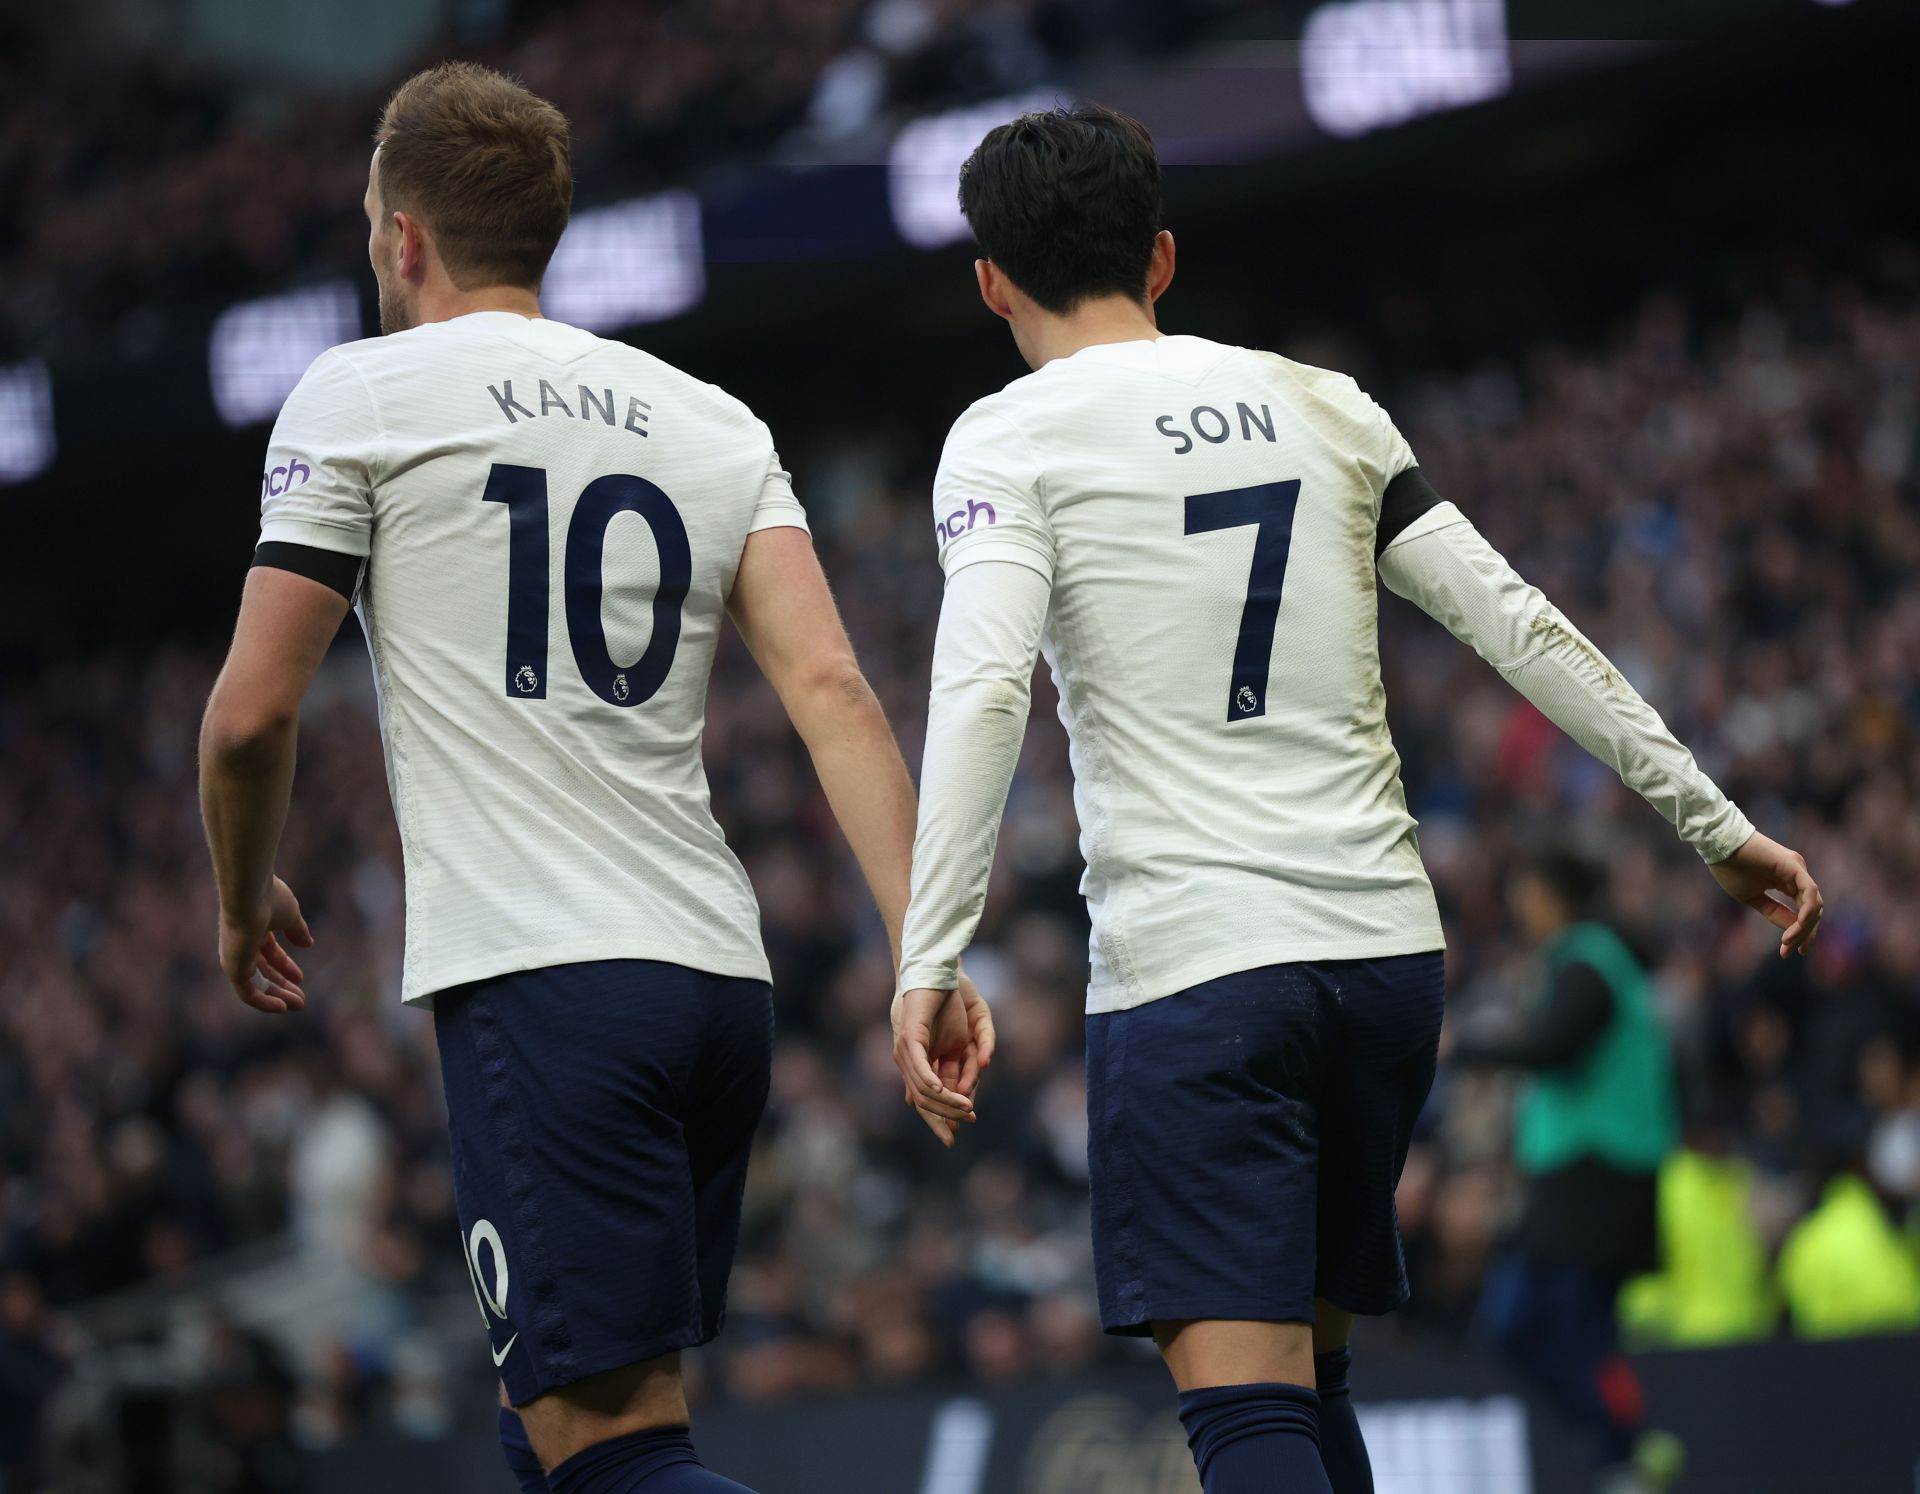 Harry Kane formed a great partnership with Son Heung-min at Tottenham Hotspur